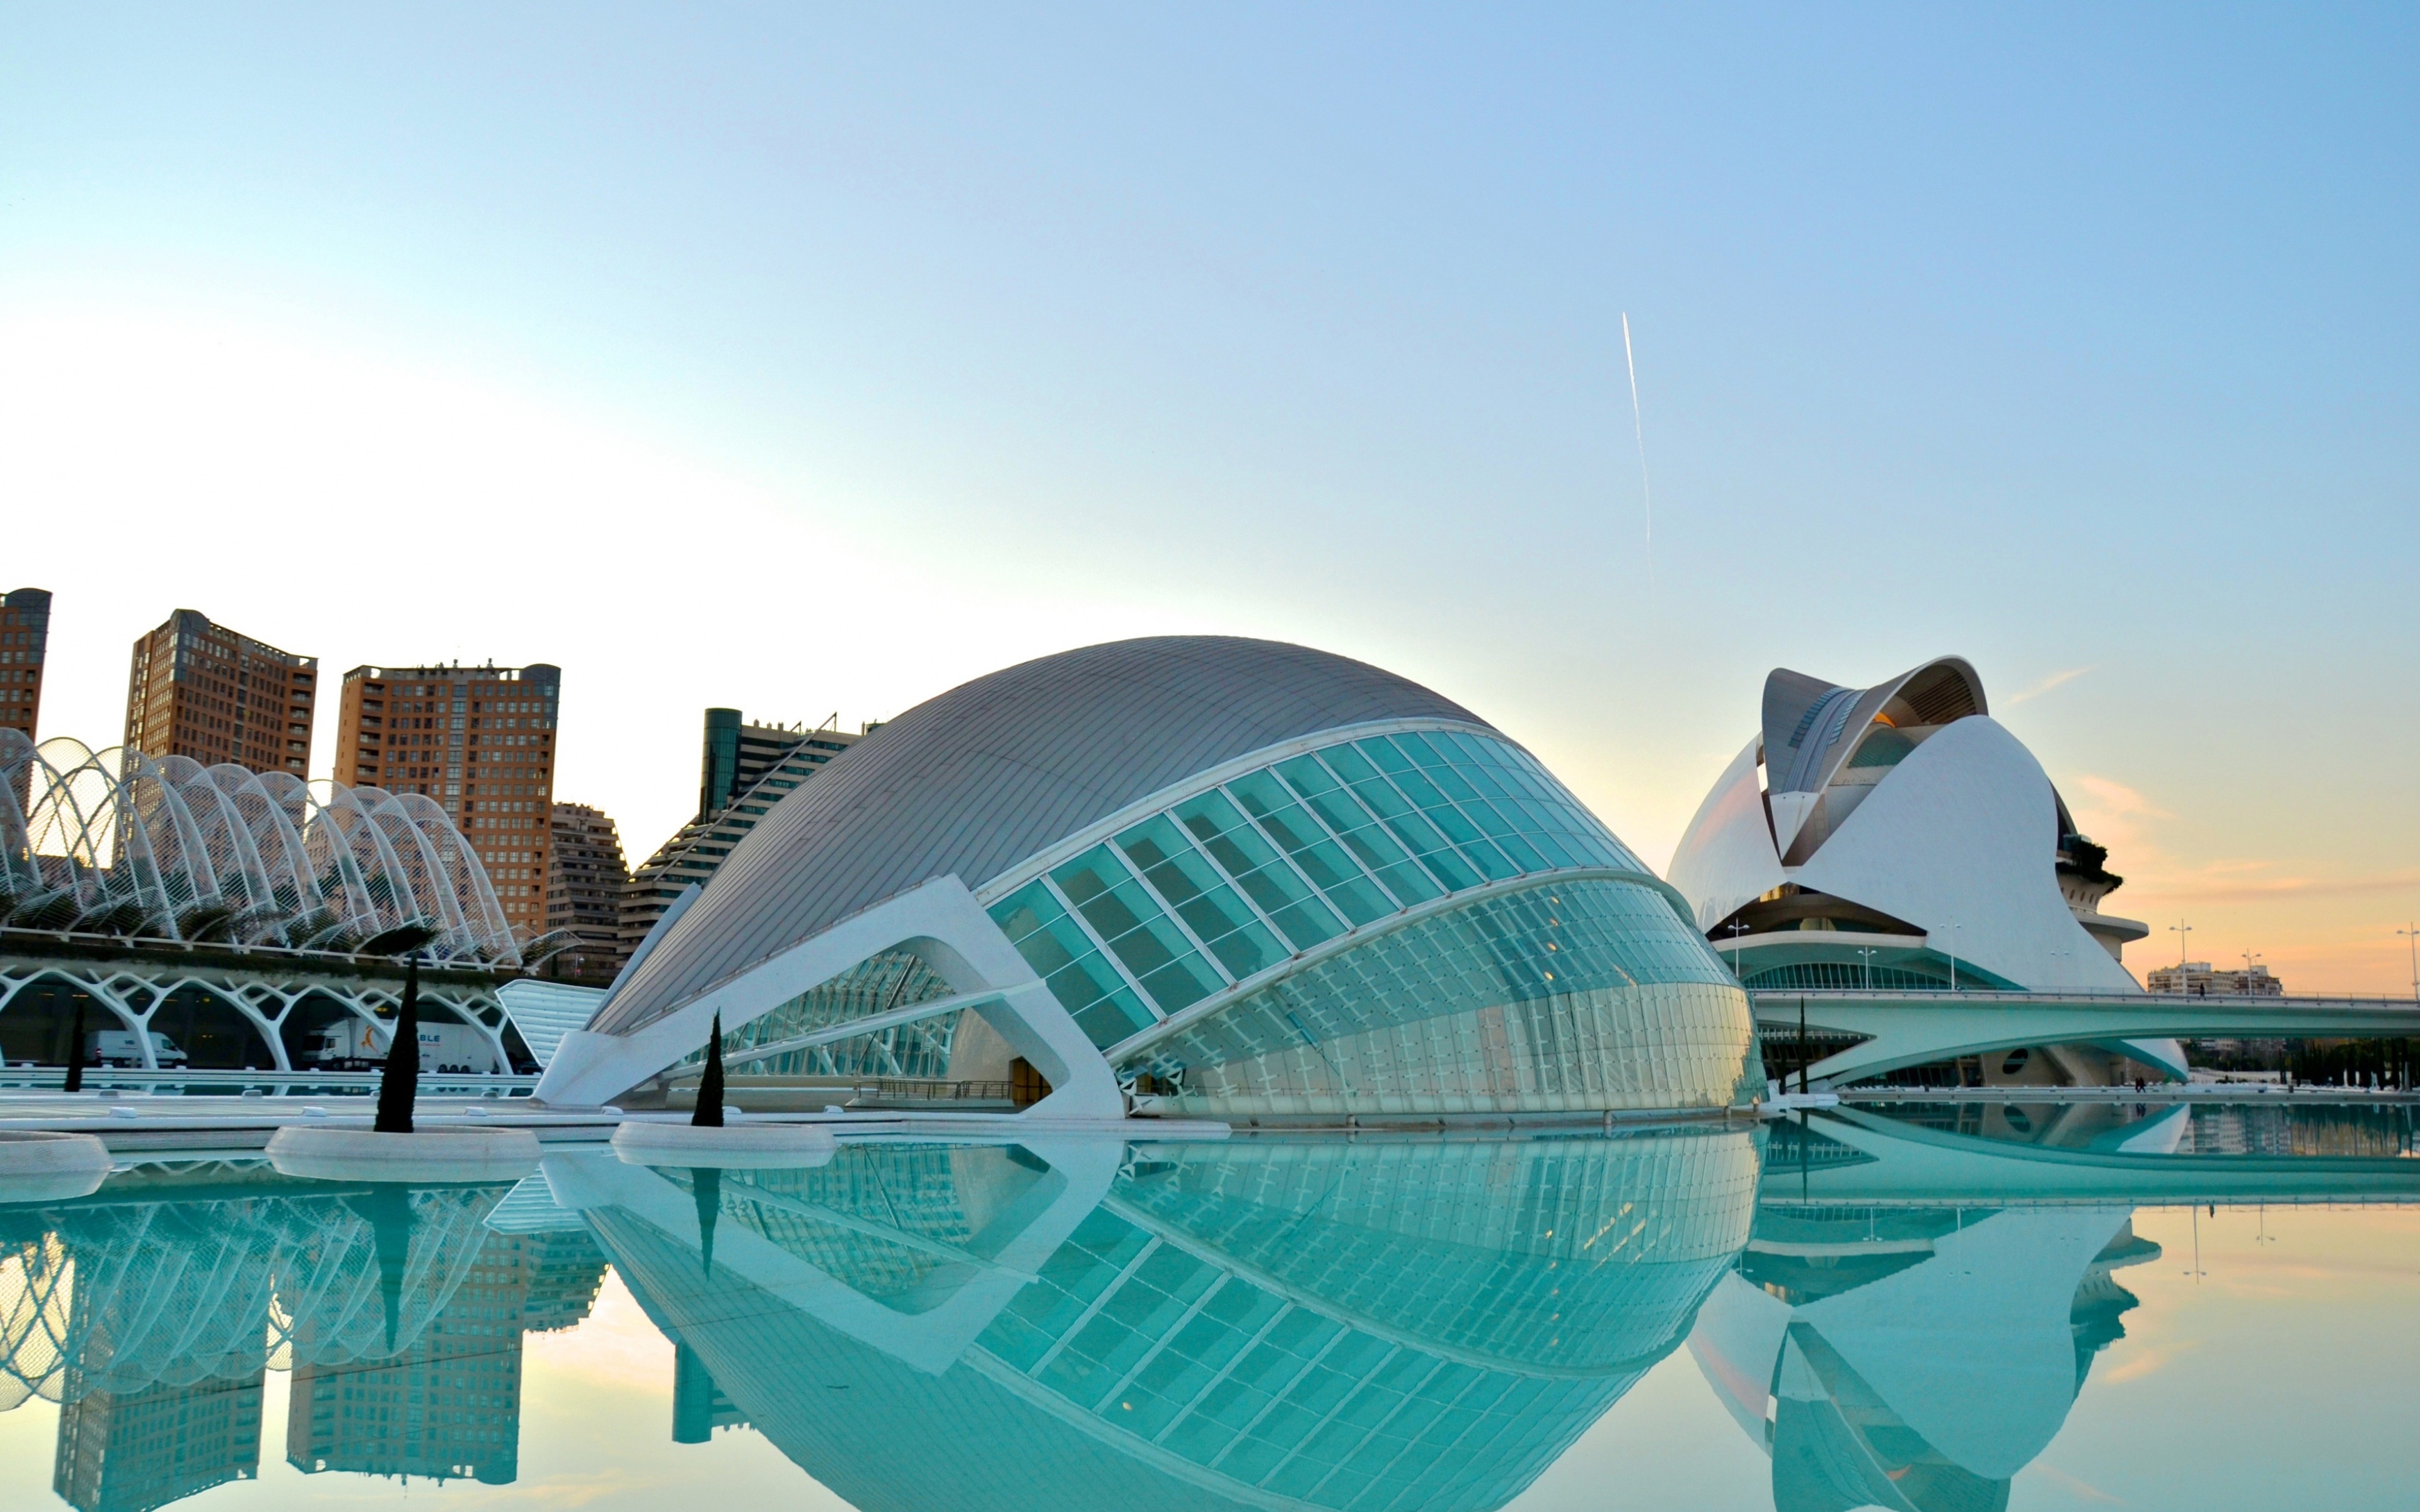 Airplane Architecture City City Of Arts And Sciences Hemispheric Jet Reflection Spain Valencia 3840x2400